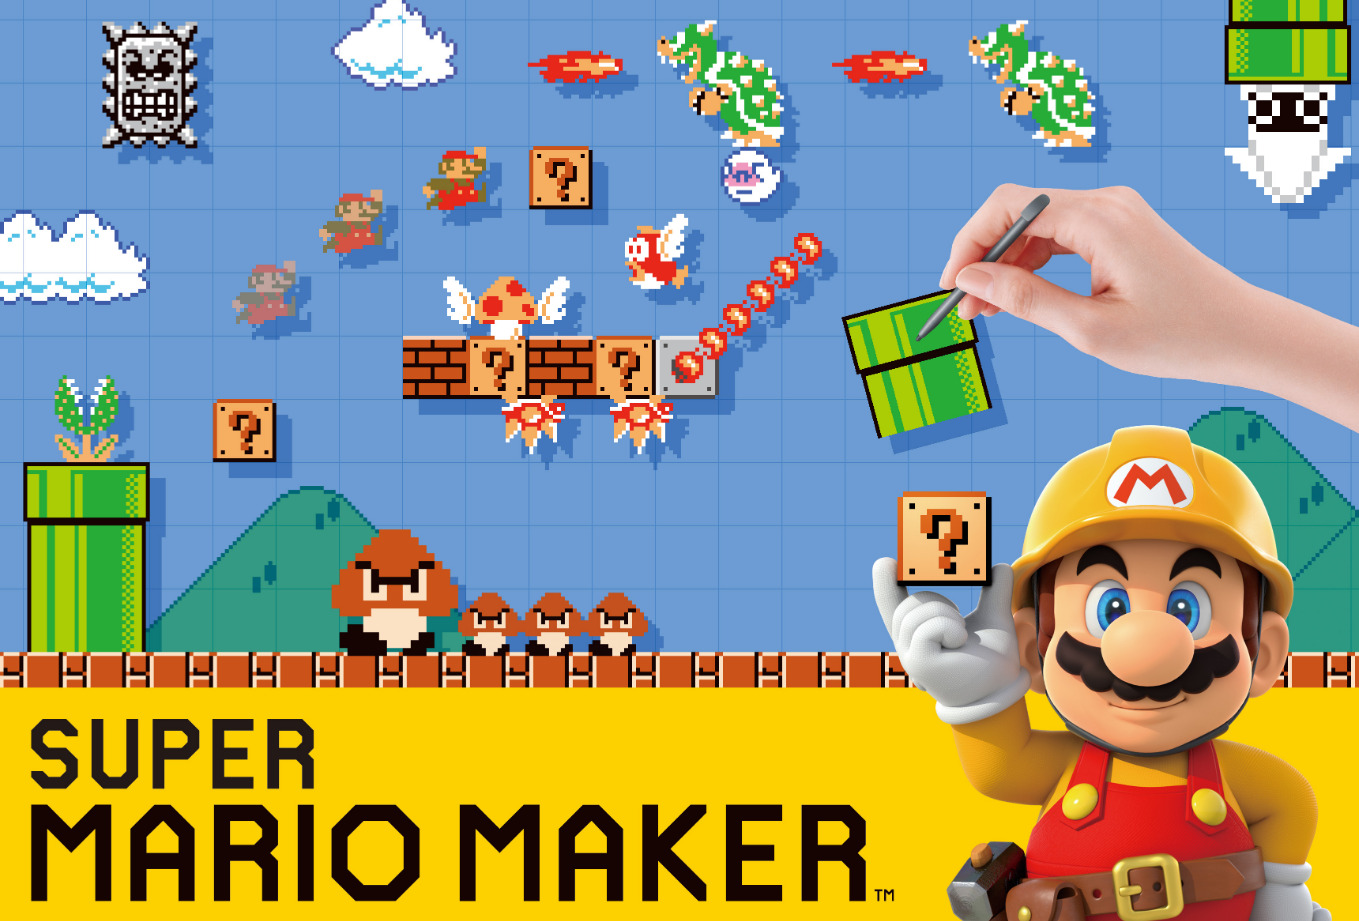 Course Uploads For Super Mario Maker On Wii U Will Stop At The End Of March 2021